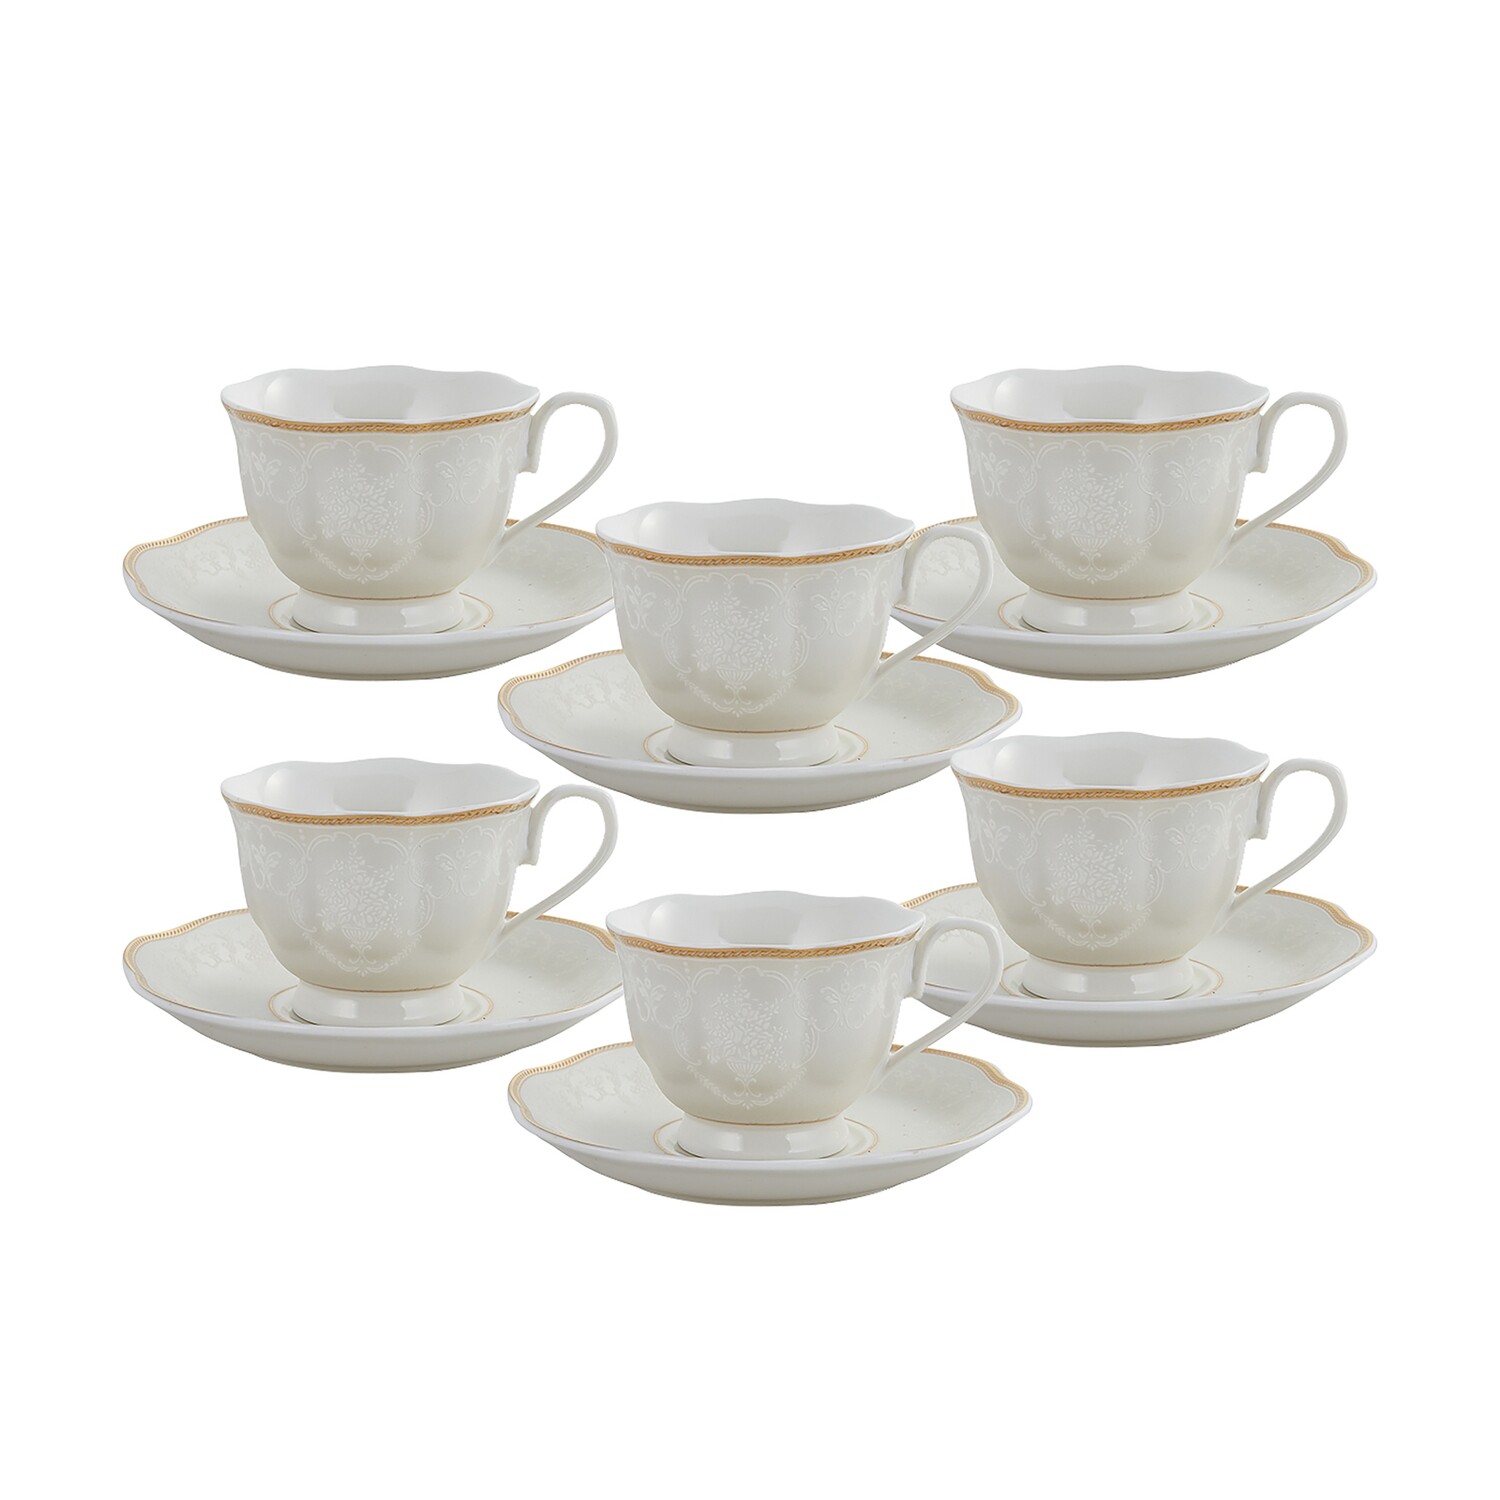 KARACA MARGARET COFFEE CUP FOR 6 PERSONS